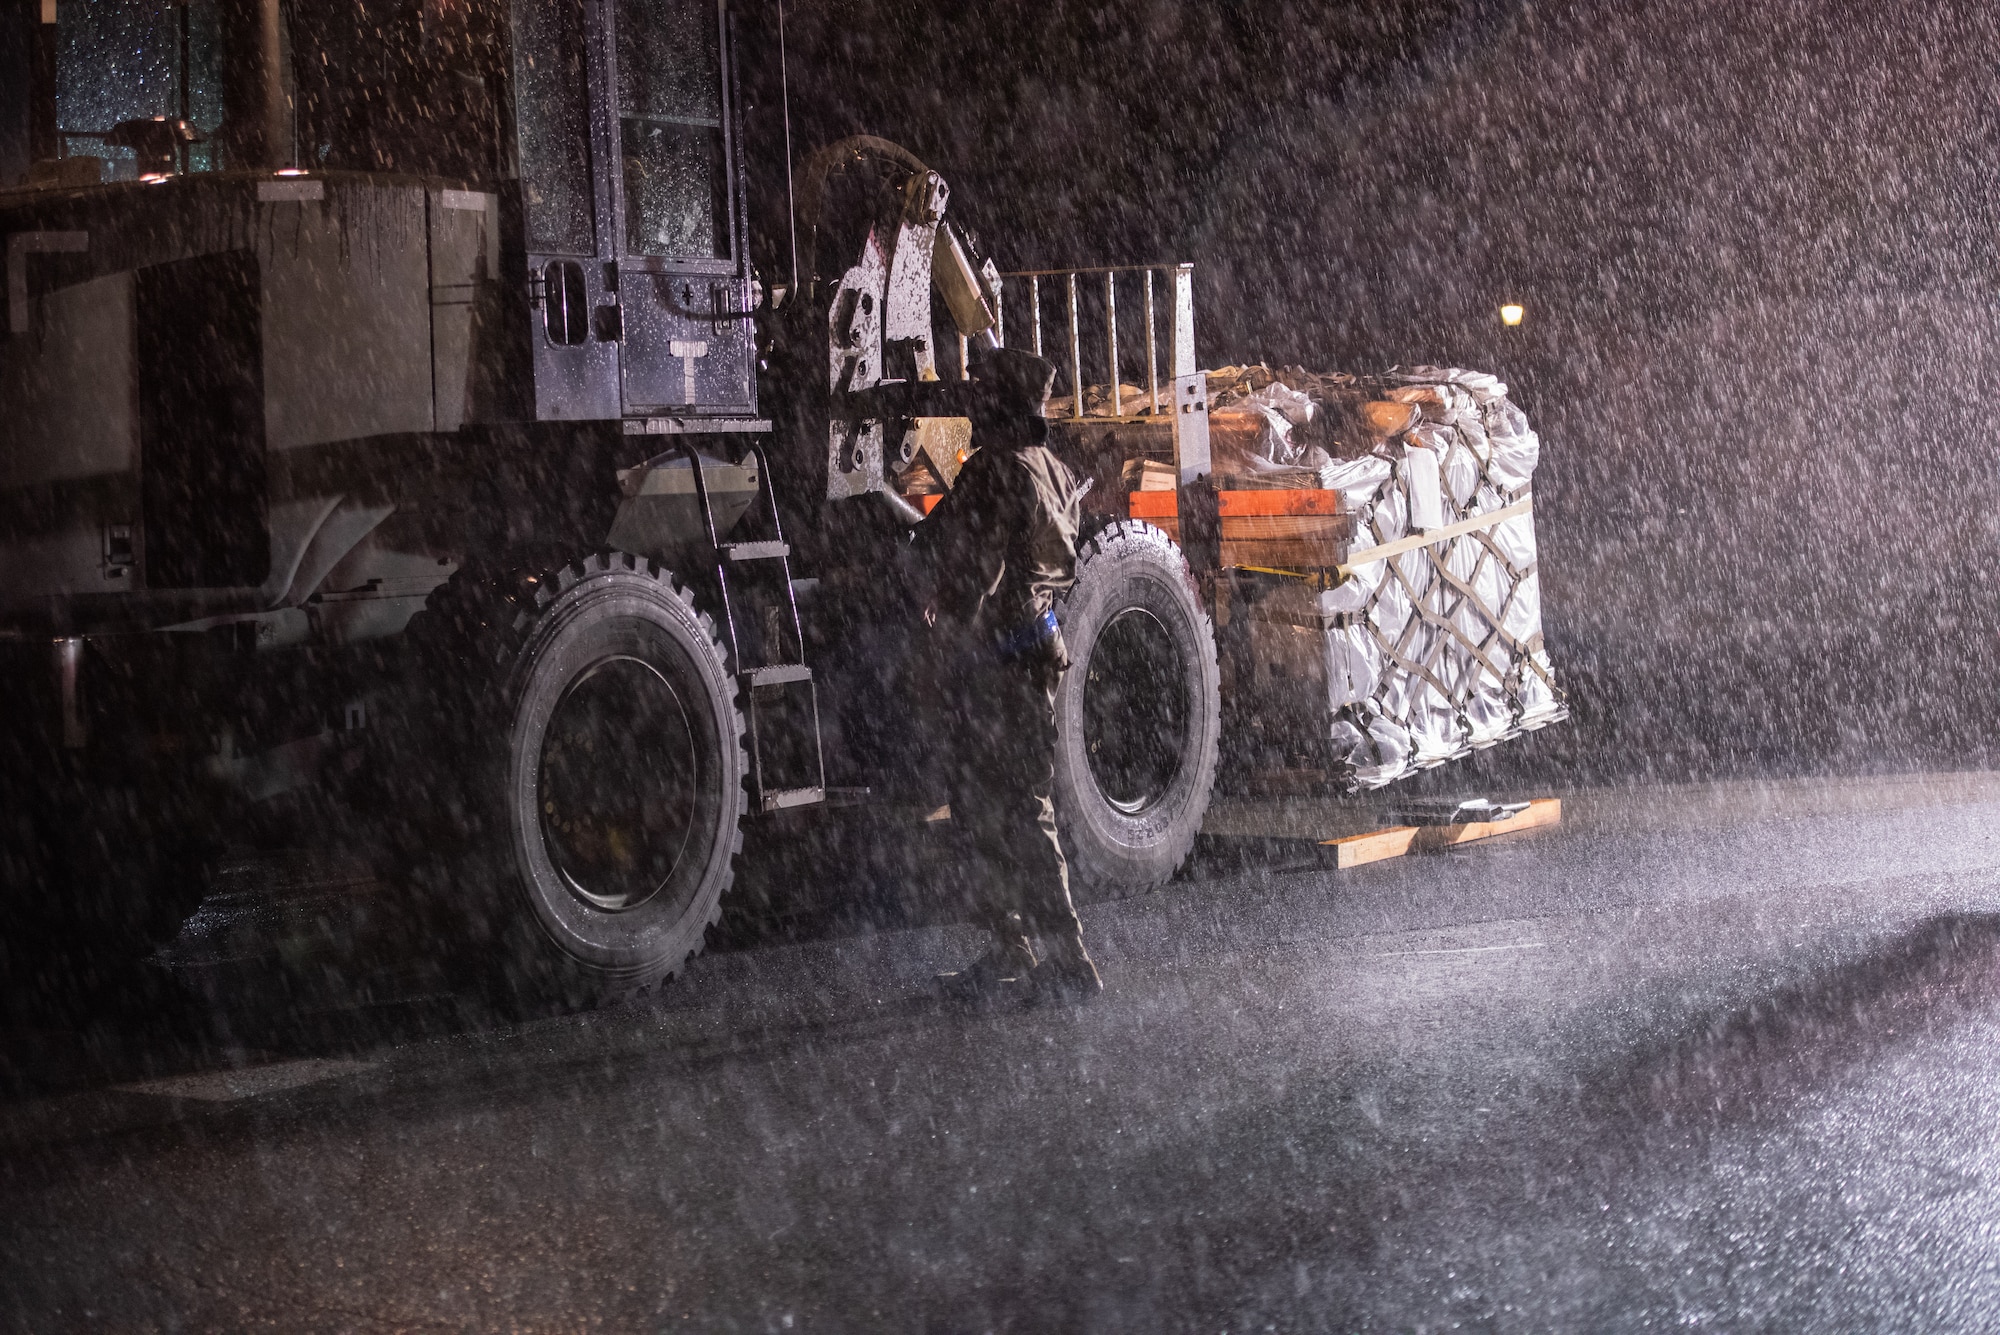 A 375th Logistics Readiness Squadron Airman loads cargo into a cargo port during the mobility exercise on Scott Air Force Base, Illinois, April 28, 2021. The 375th LRS utilized tarps on port cargo to protect against the inclement weather. (U.S. Air Force photo by Airman 1st Class Isaac Olivera)